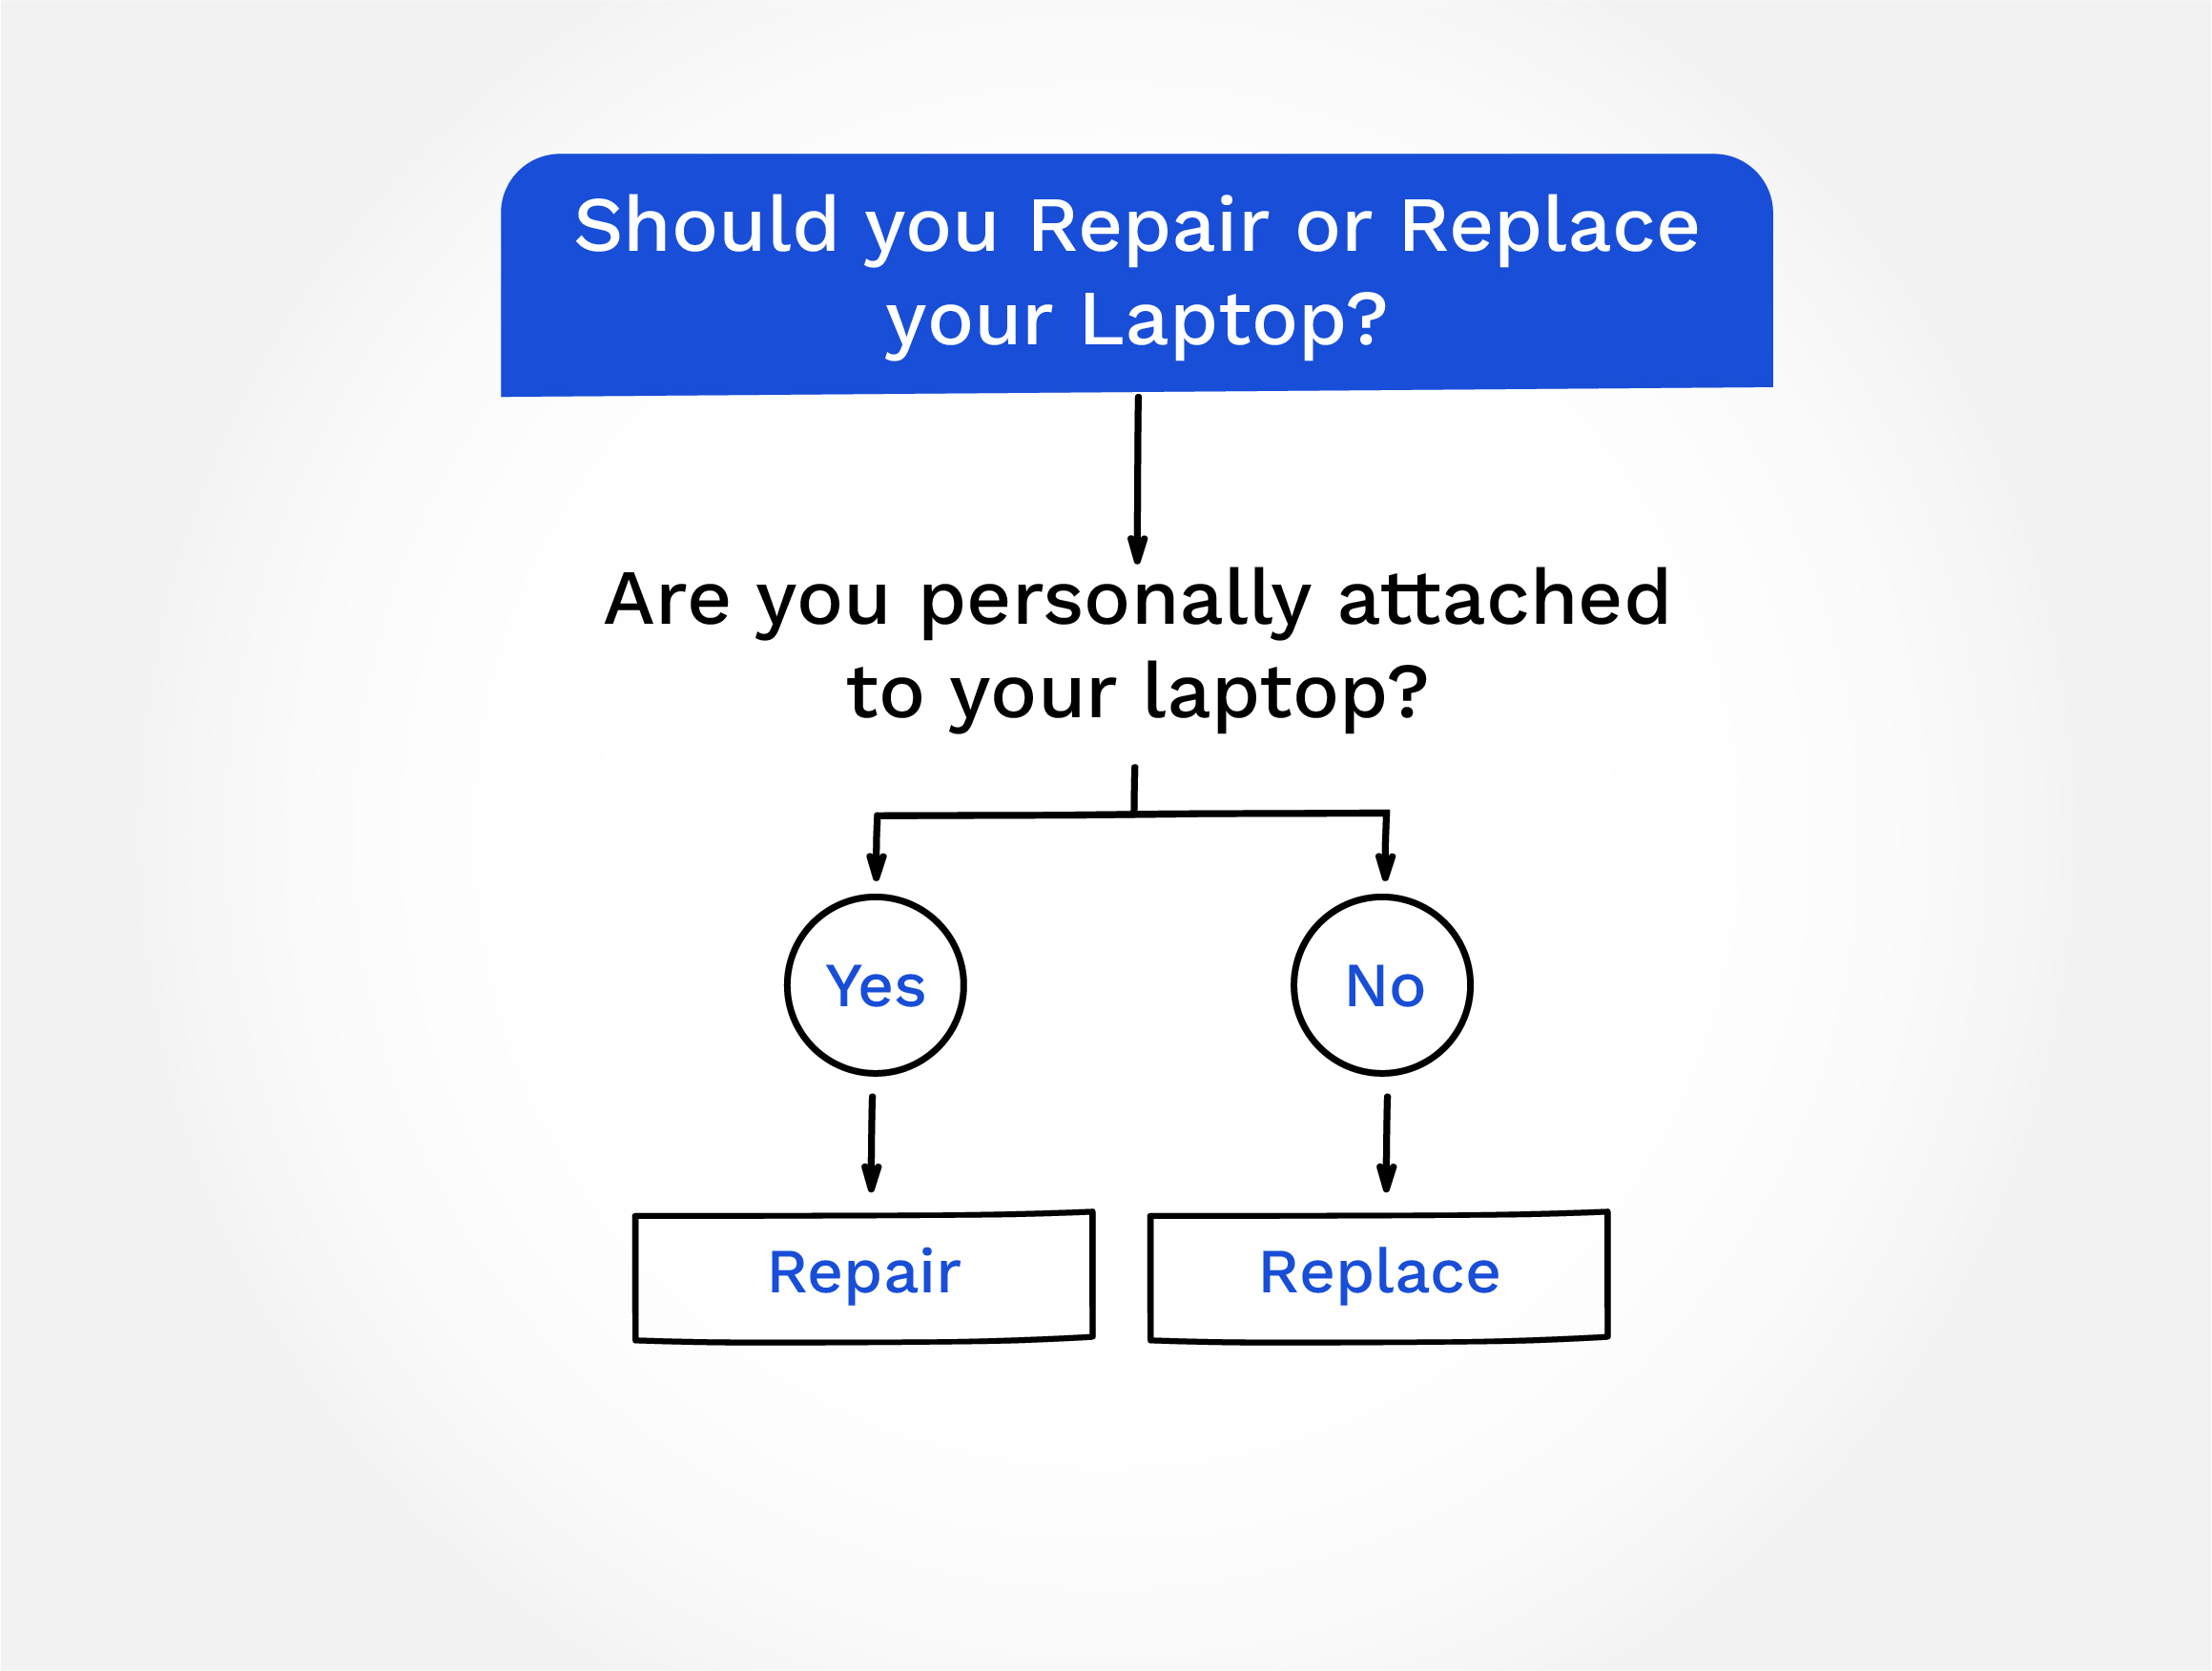 Are You Personally Attached to Your Laptop?